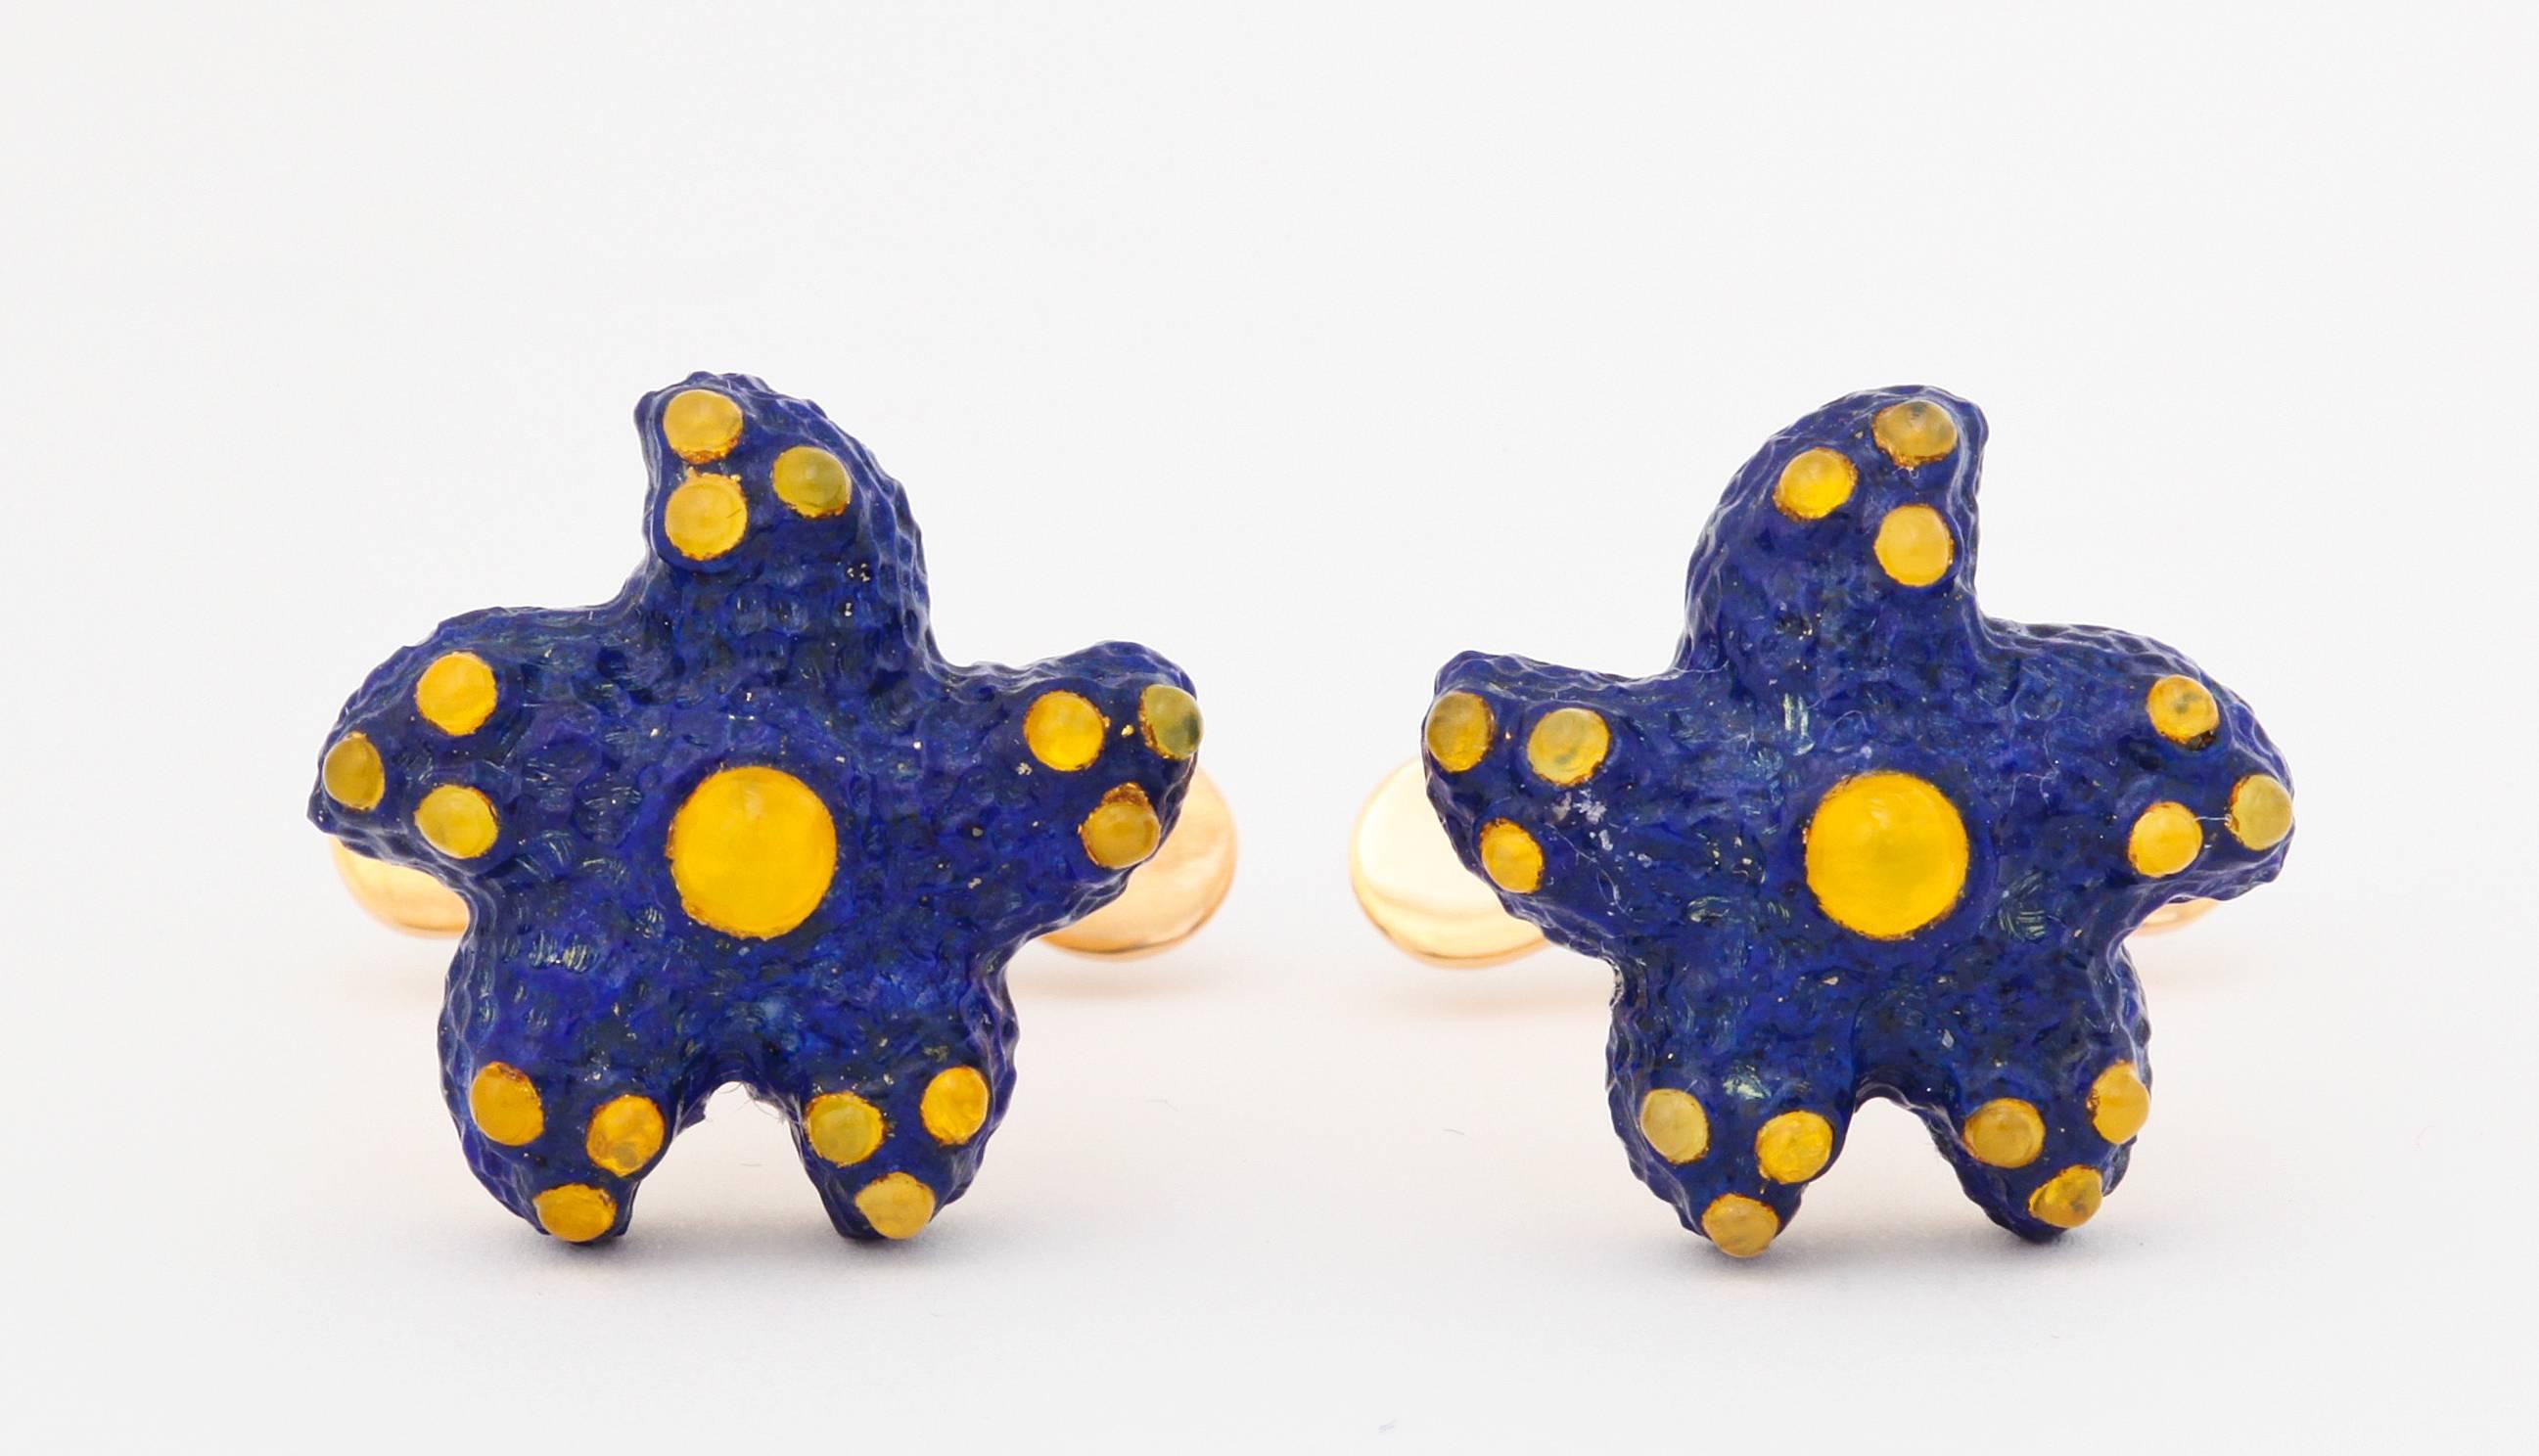 The finest cobalt blue lapis-lazuli is expertly carved in the form of a sea star and delicately set with spheres of yellow agate.  A matching lapis cabochon is set into the spring back to complete these elegant cufflinks.  This design is always one